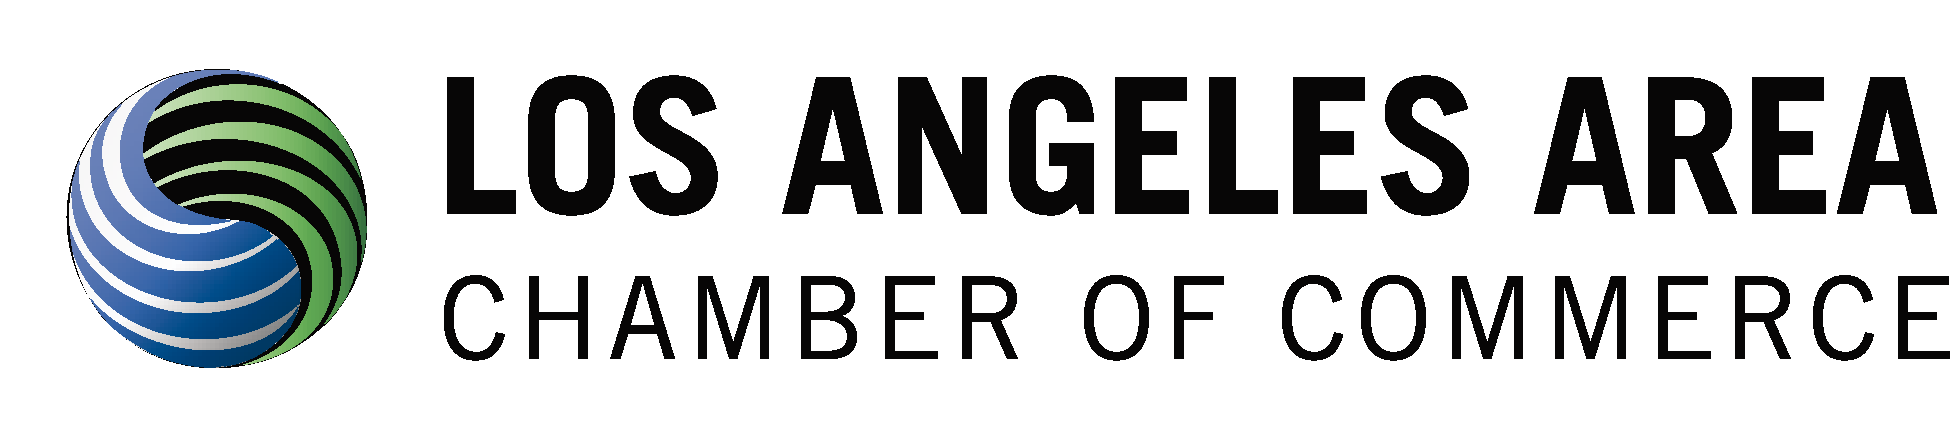 Los Angeles Area Chamber of Commerce NEW Logo Vector